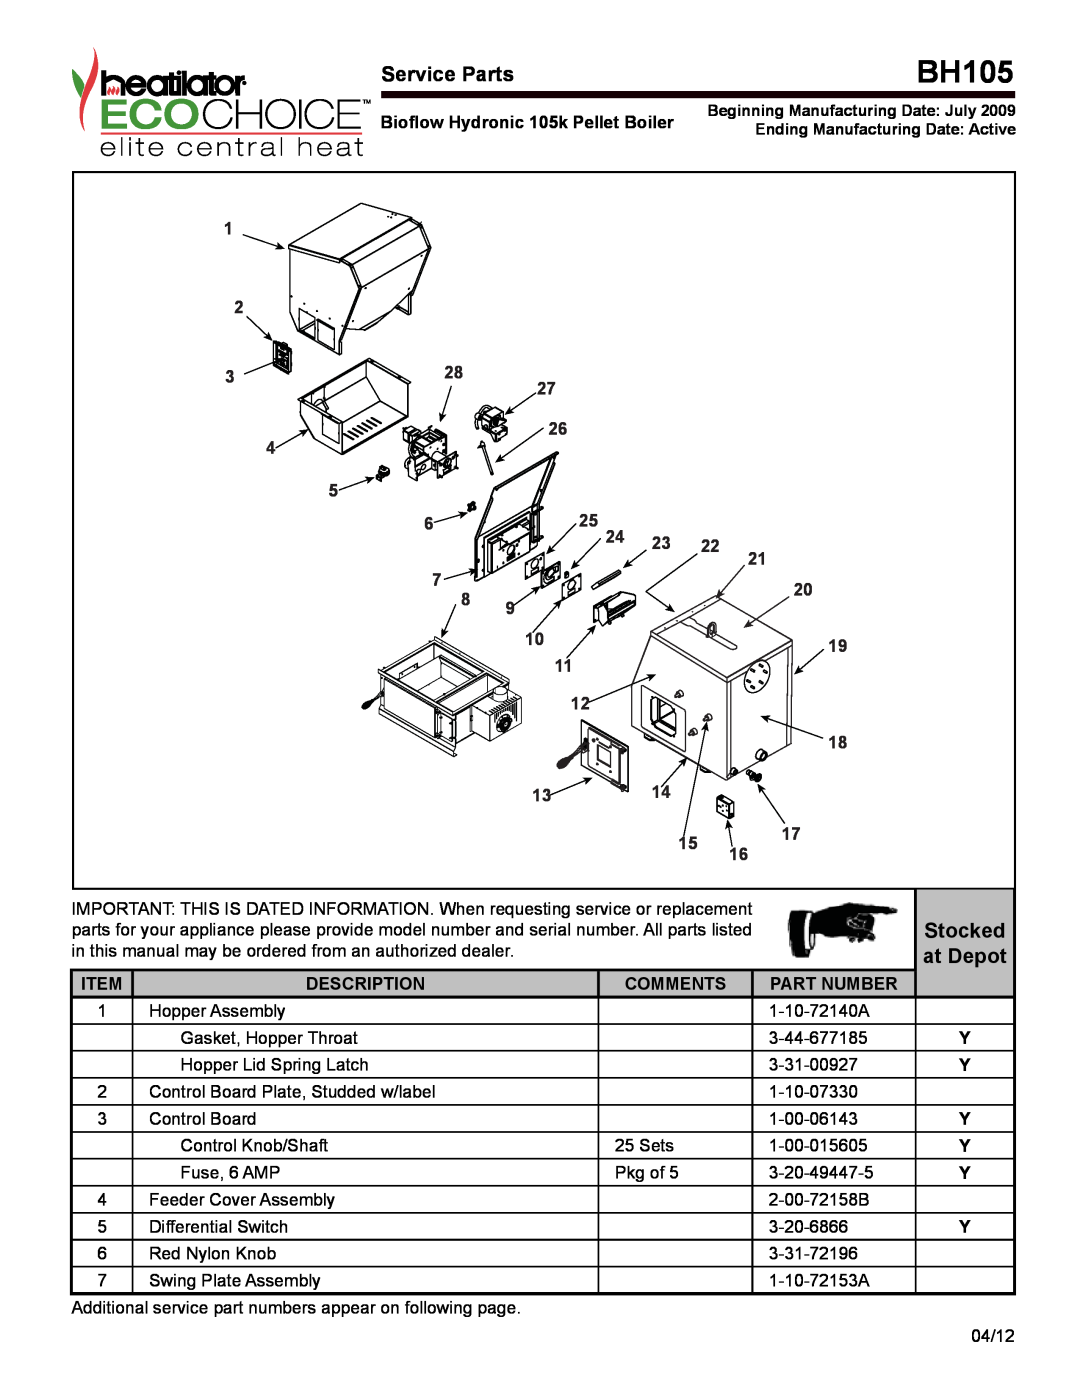 Hearth and Home Technologies BH 105 manual bh105, Stocked 